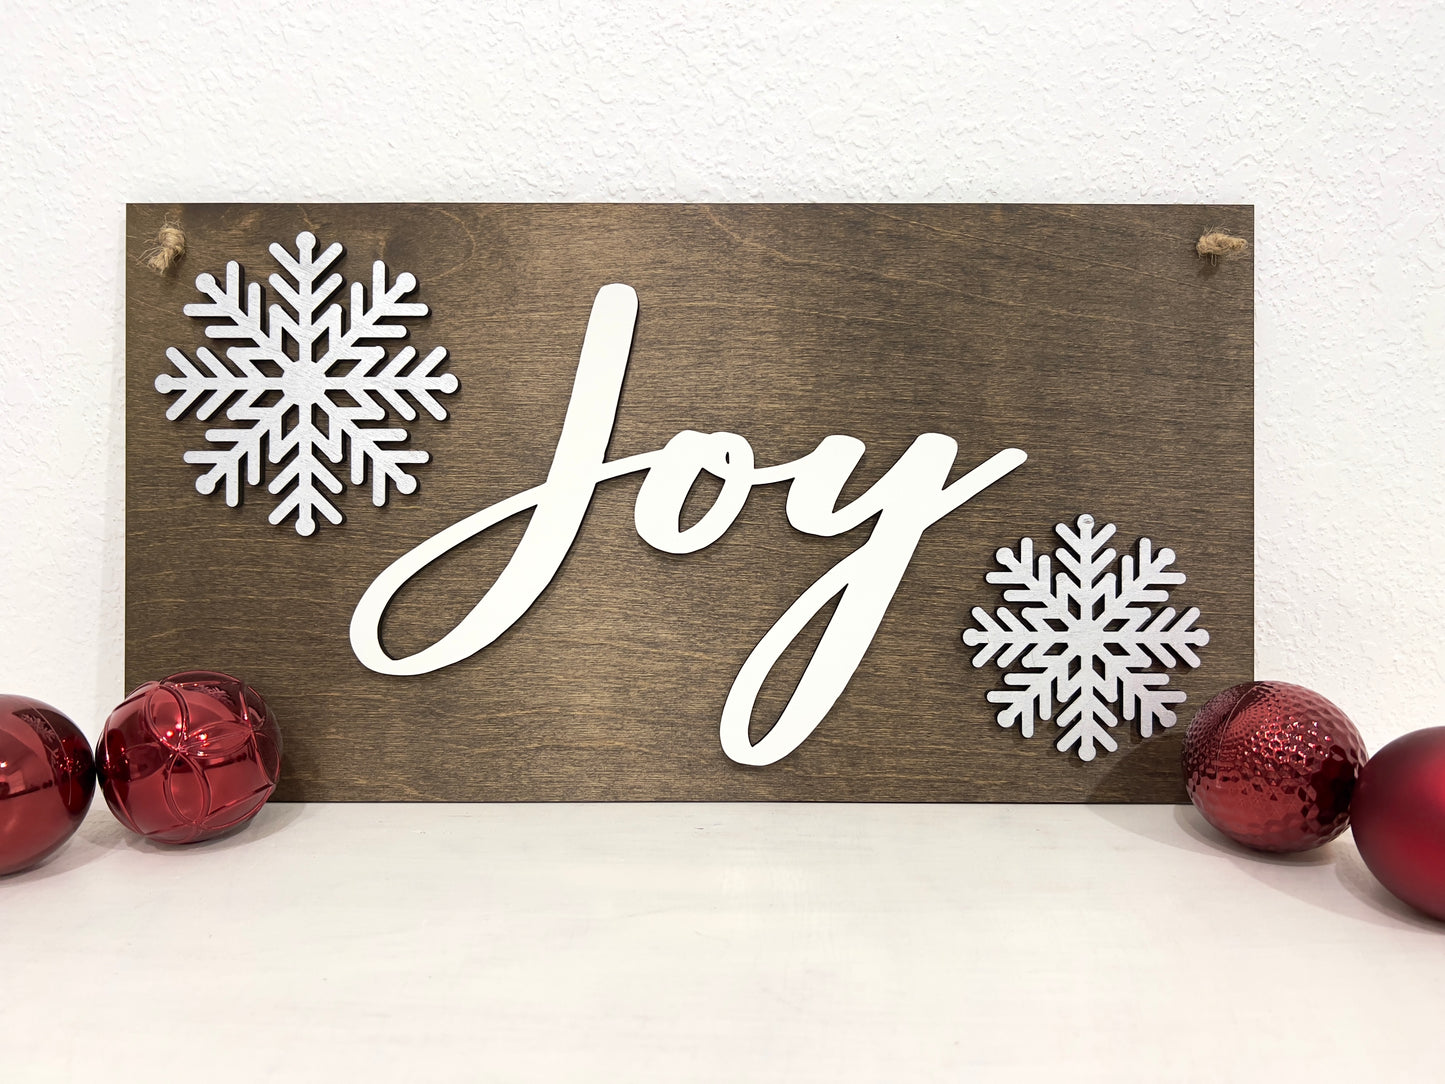 3D joy sign - snowflake Christmas decorations - Rustic Christmas Signs - Celebrating Together